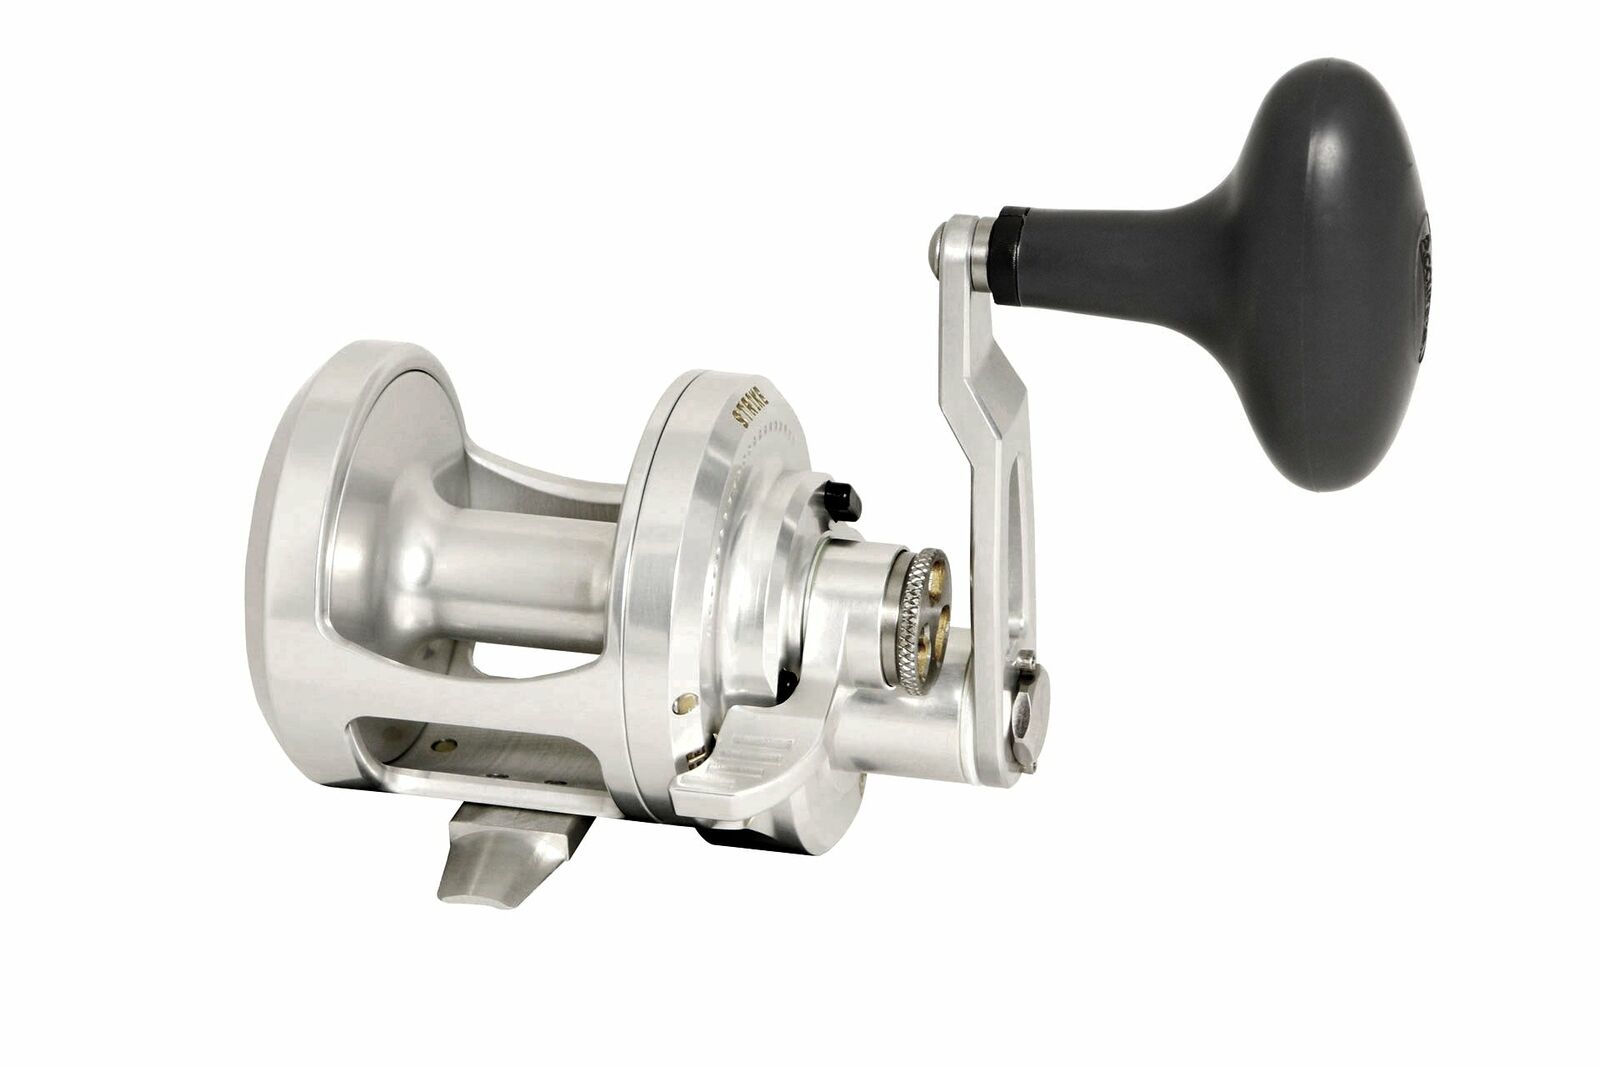 Accurate Valiant SPJ Slow Pitch Jigging Reel | Select Size & Speed | 